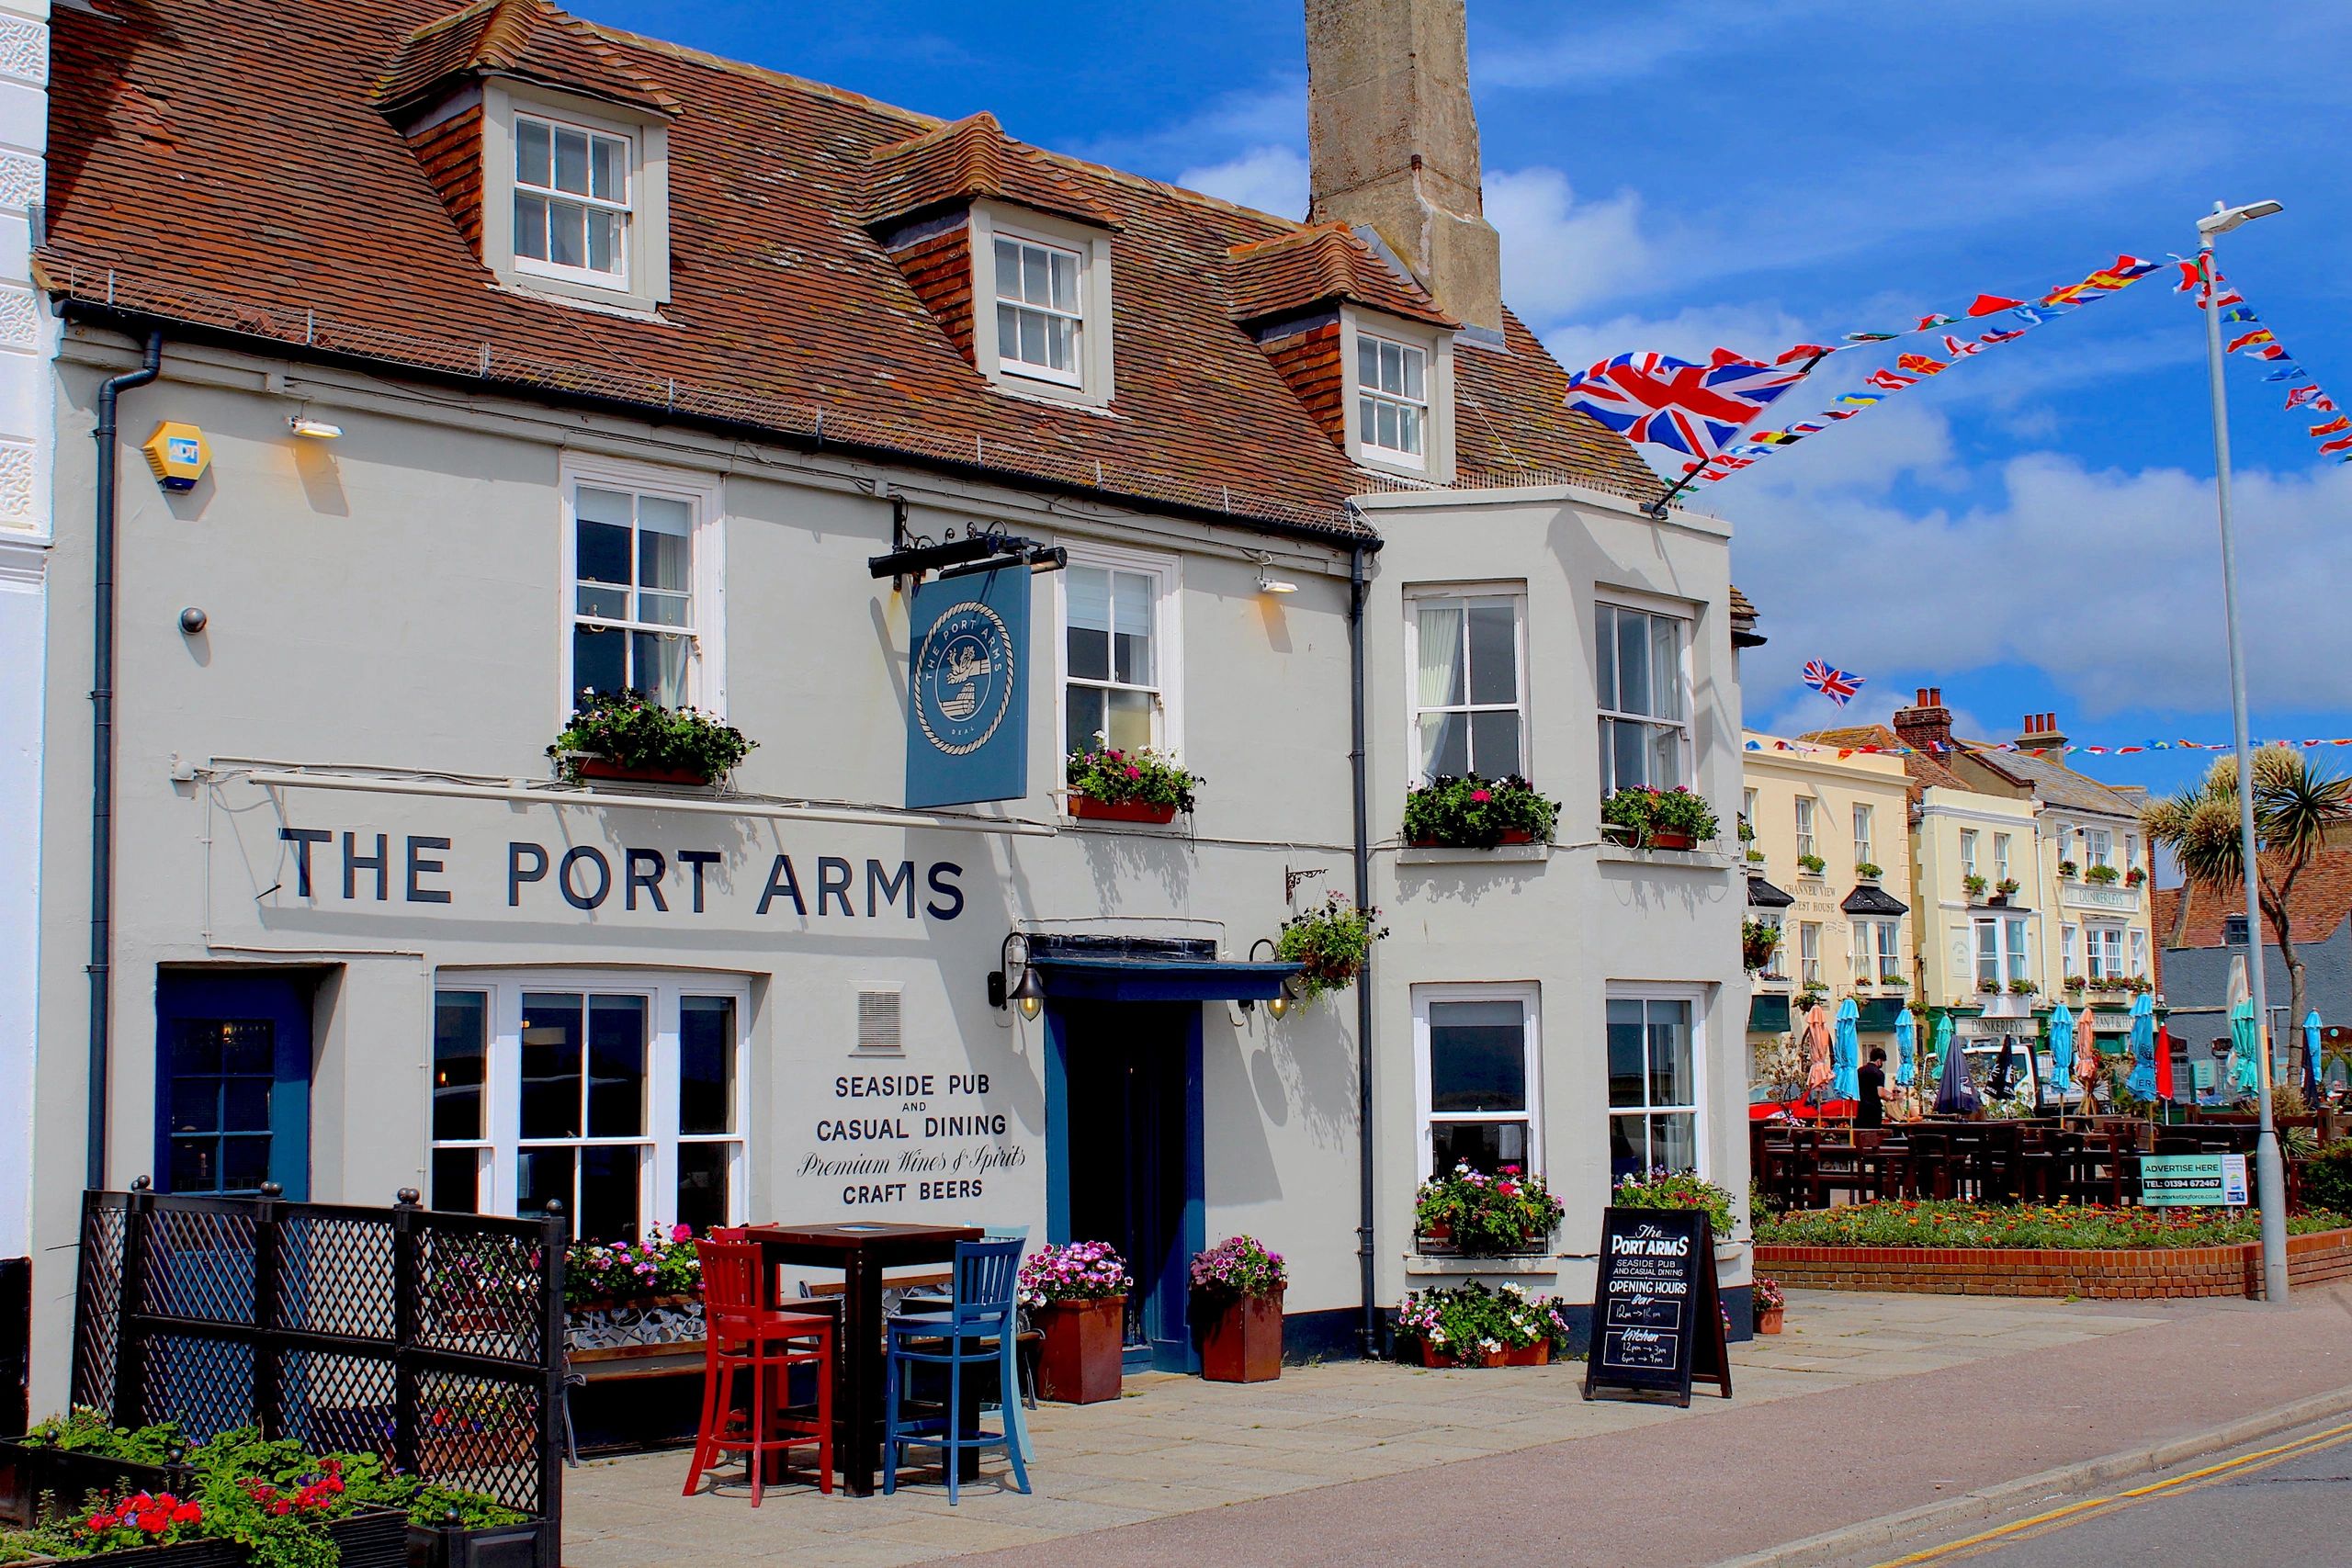 The Port Arms | Beautiful Seaside Pub in Deal, Kent